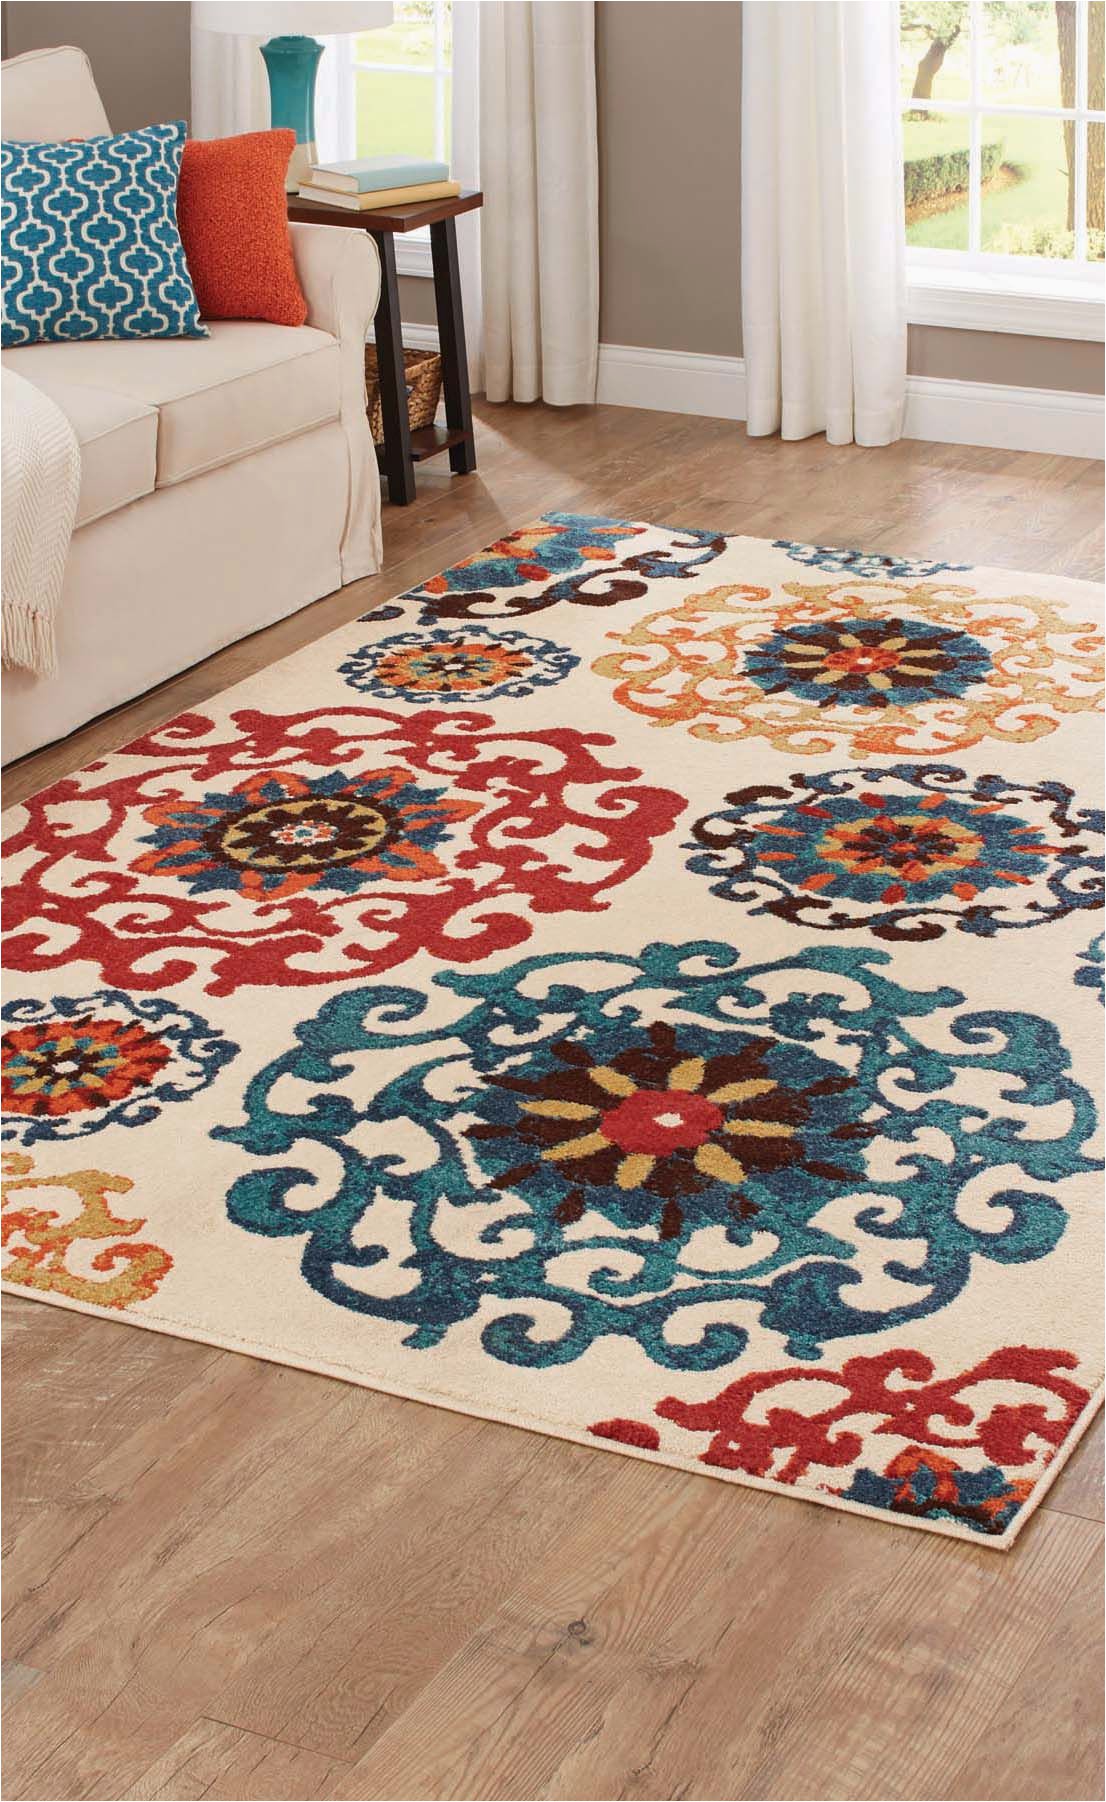 Better Homes and Gardens Suzani area Rug Pin by ÐÐ°ÑÐ°Ð ÑÑ ÐÐ°ÑÐ°Ð Ð¸ On 711 In 2020